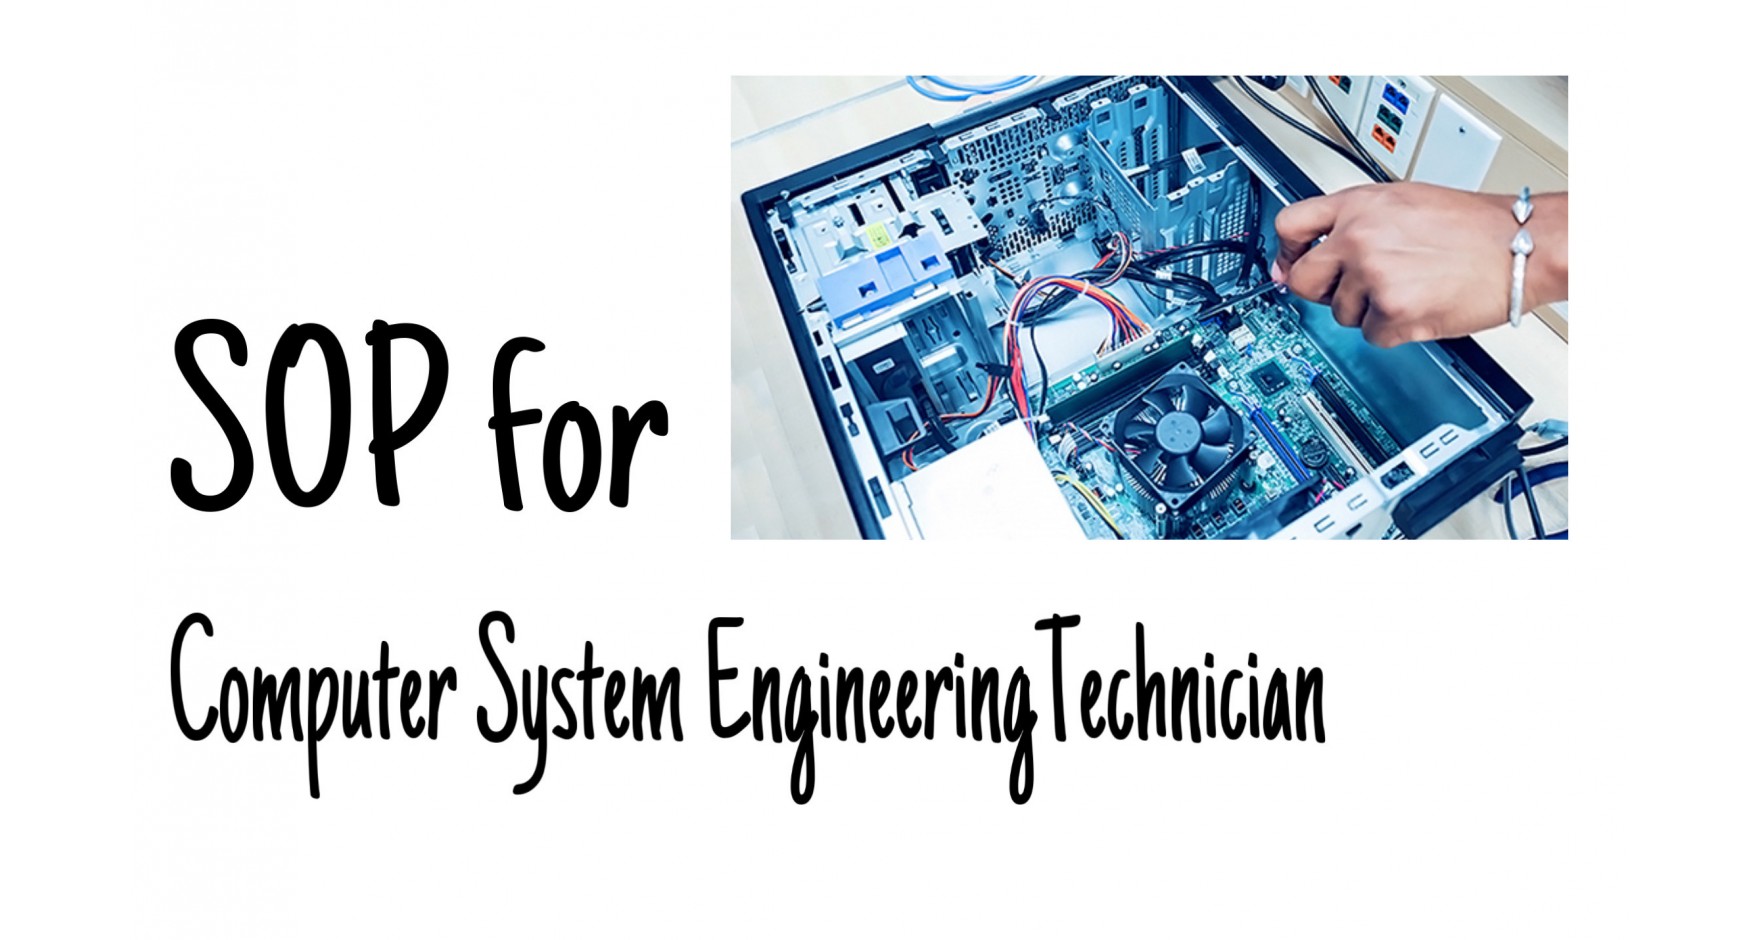 How to write SOP for Computer System Engineering Technician?